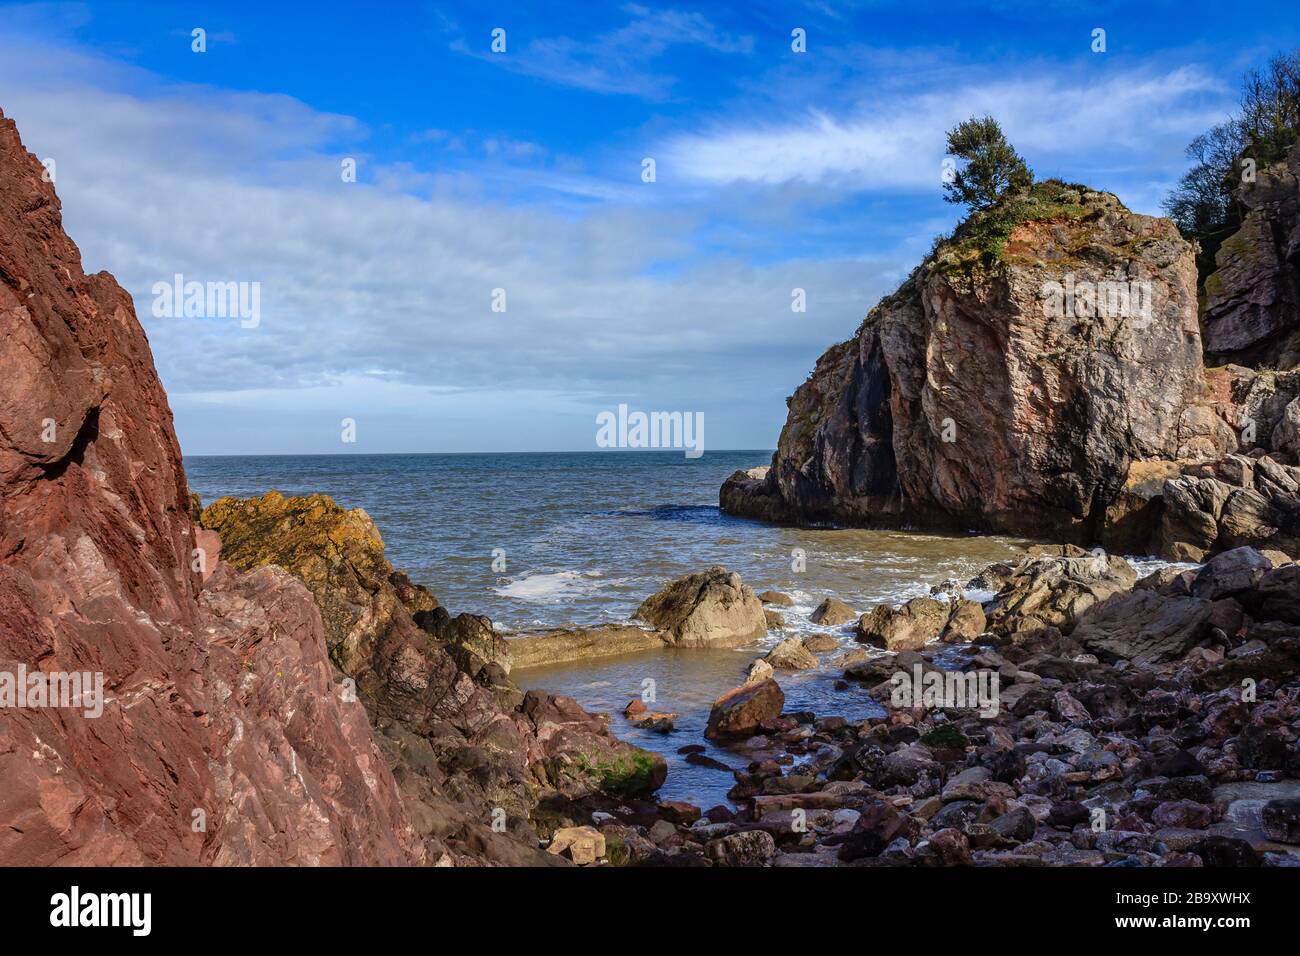 Rocks at Babbacombe Beach, a secluded bay at Babbacombe, Torquay, Devon, UK. March 2018. Stock Photo